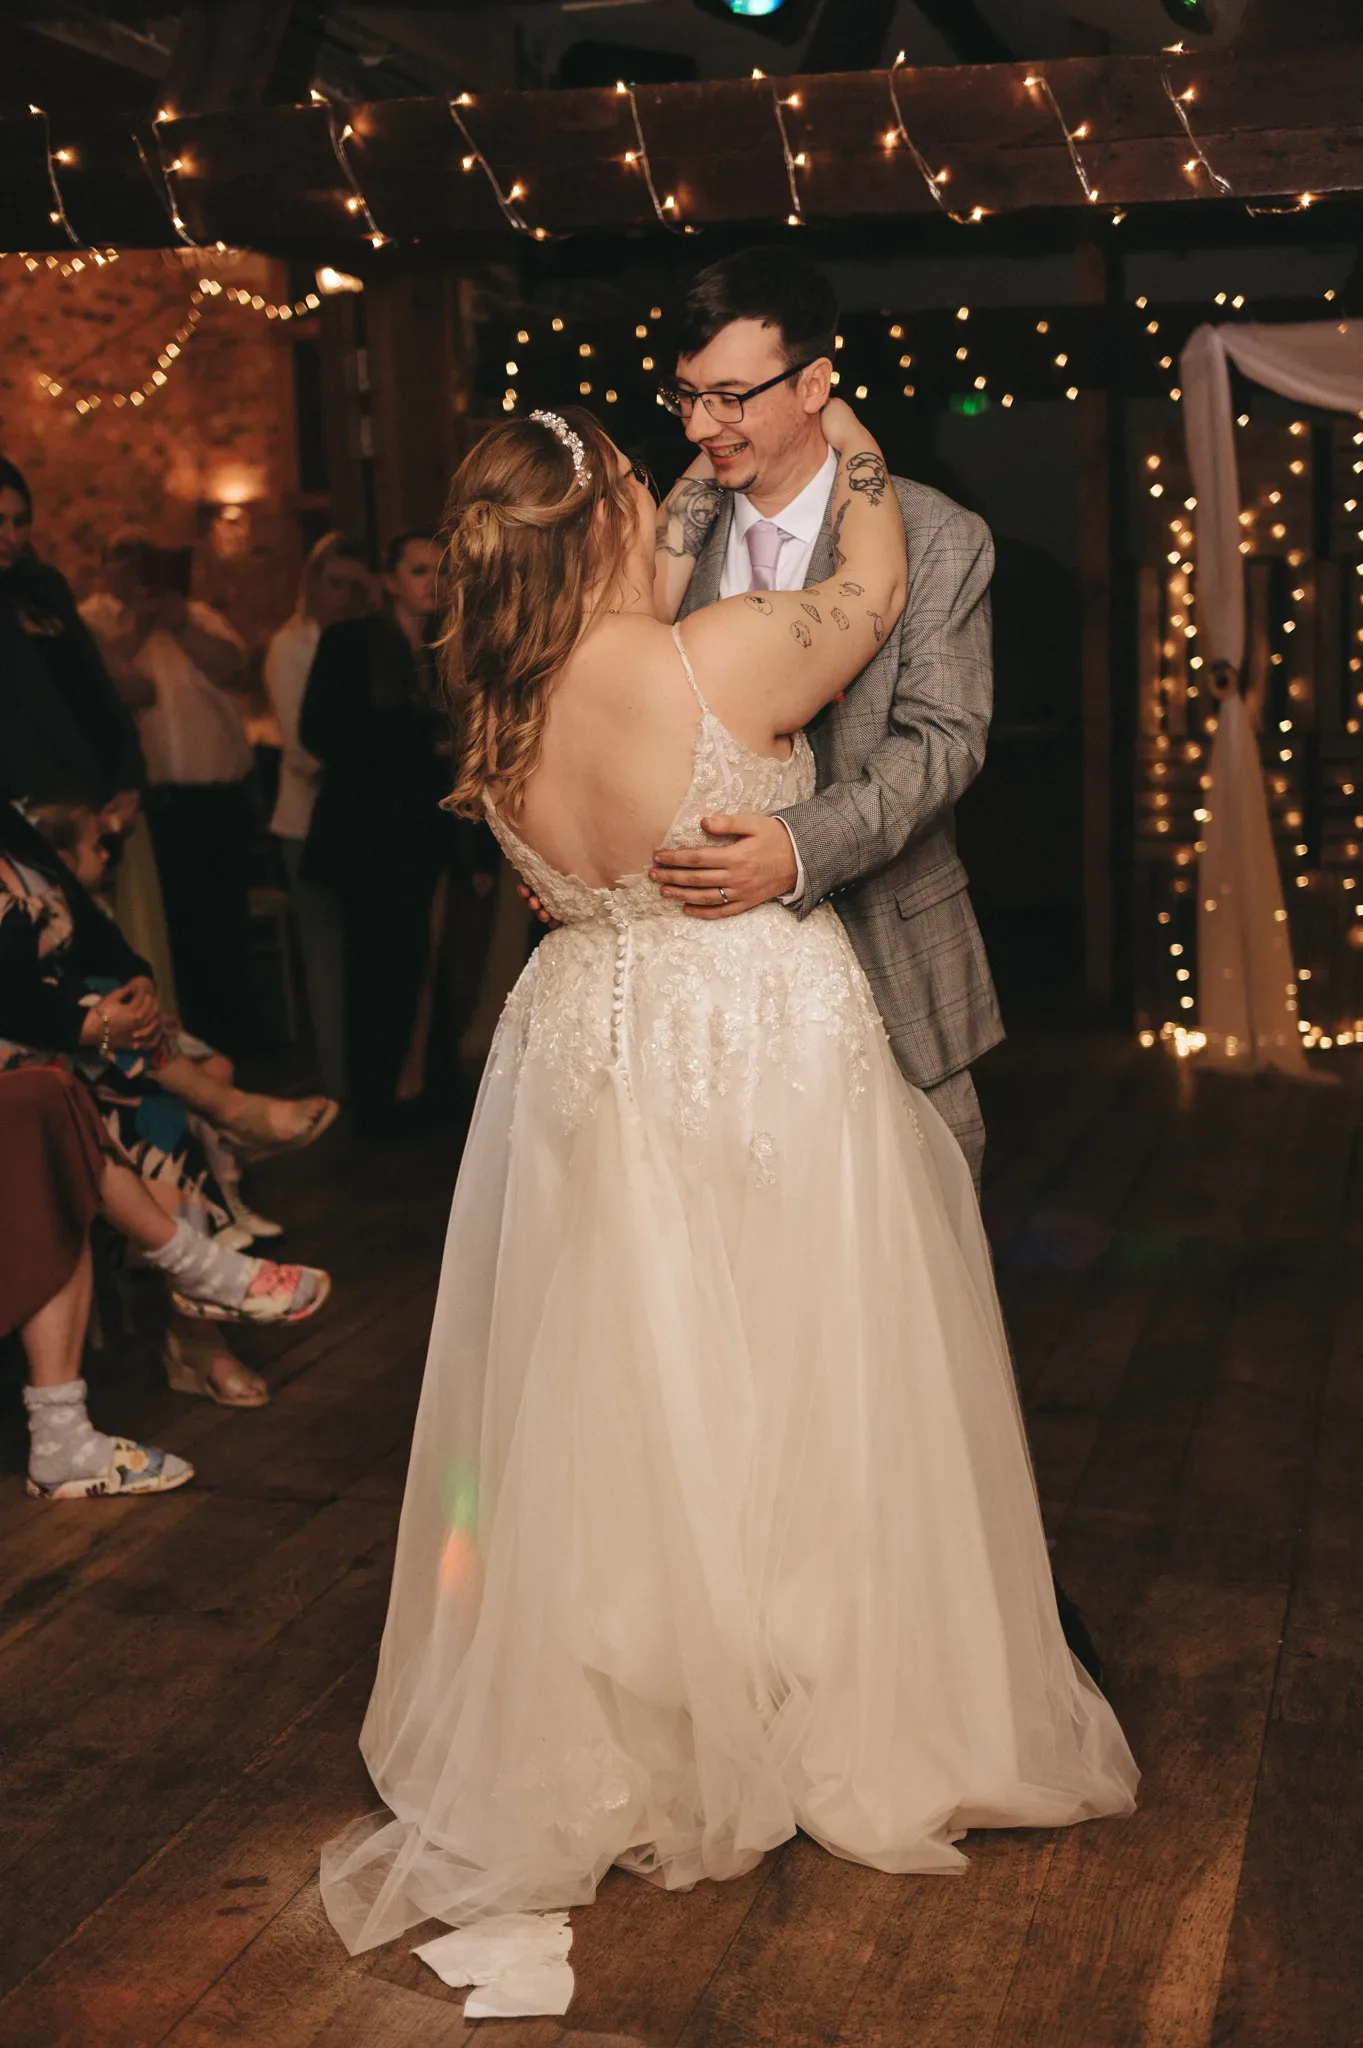 A joyful bride and groom share their first dance under twinkling lights, surrounded by guests, celebrating their wedding in a rustic venue.